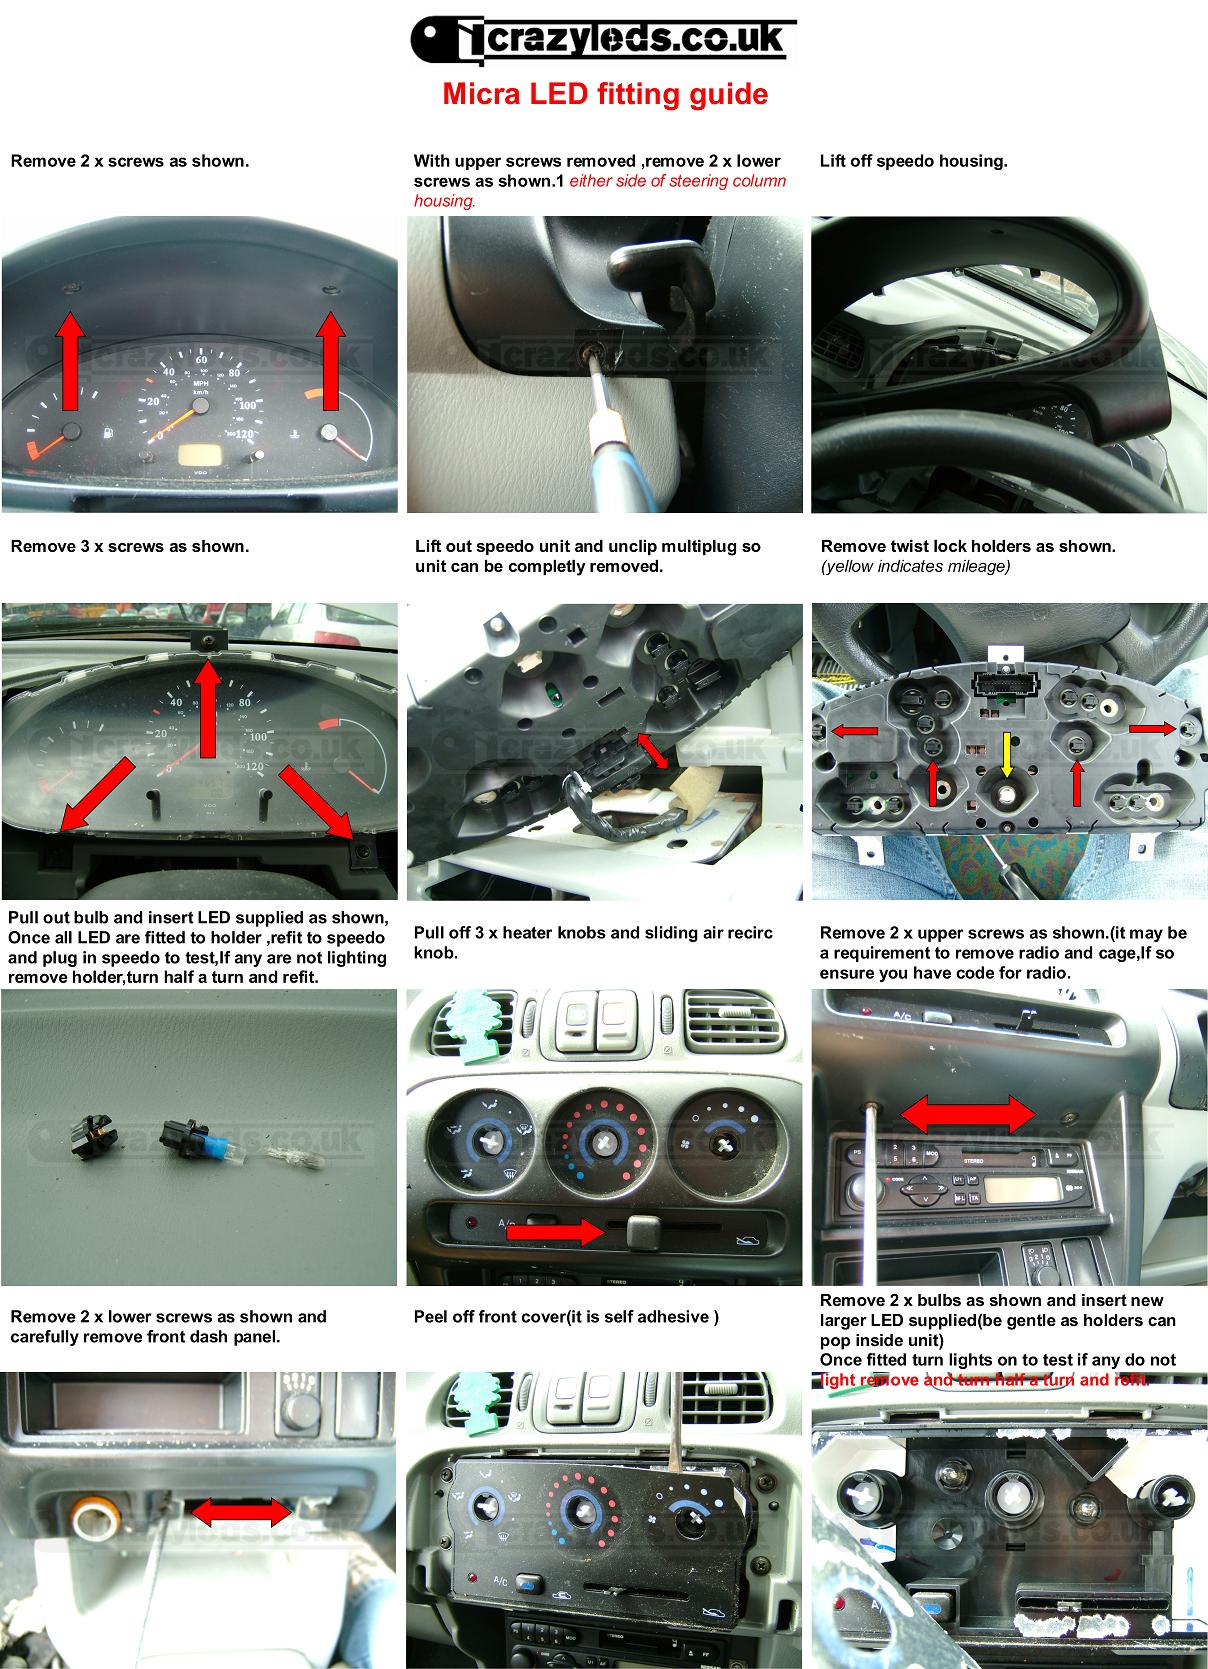 Micra fitting guide email file.jpg